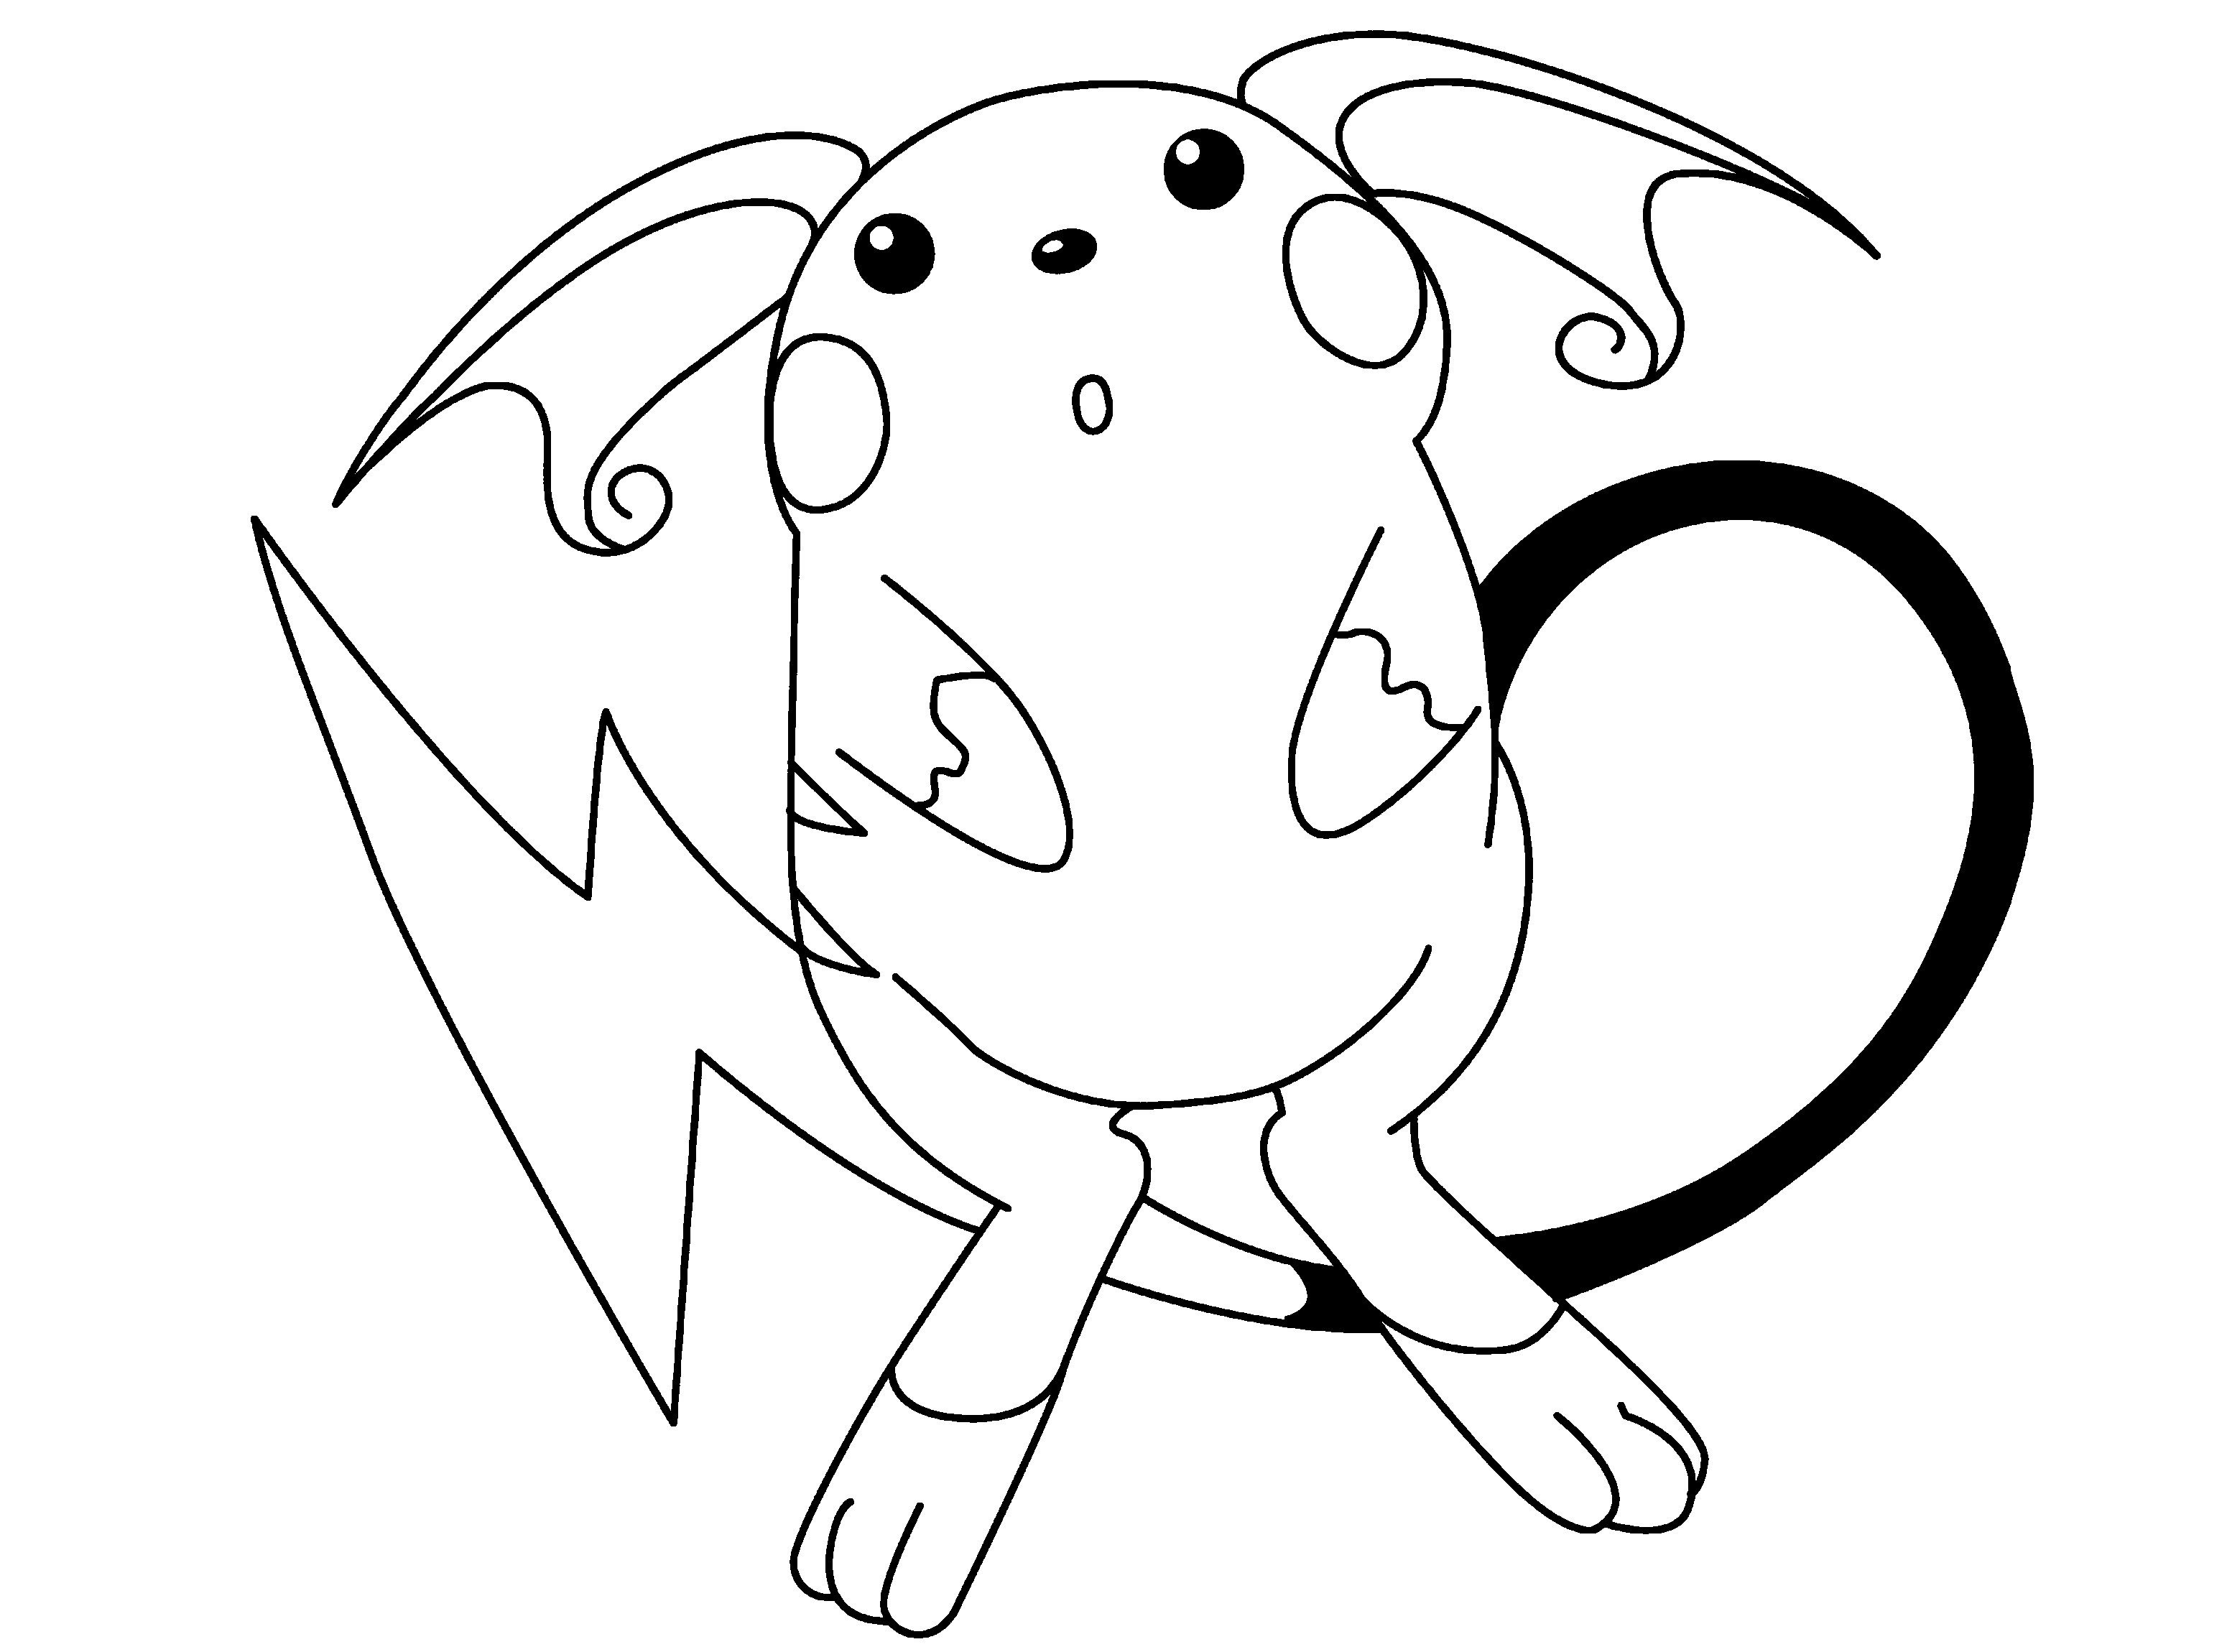 Pokeman Coloring Pages
 Pokemon Coloring Pages Join your favorite Pokemon on an